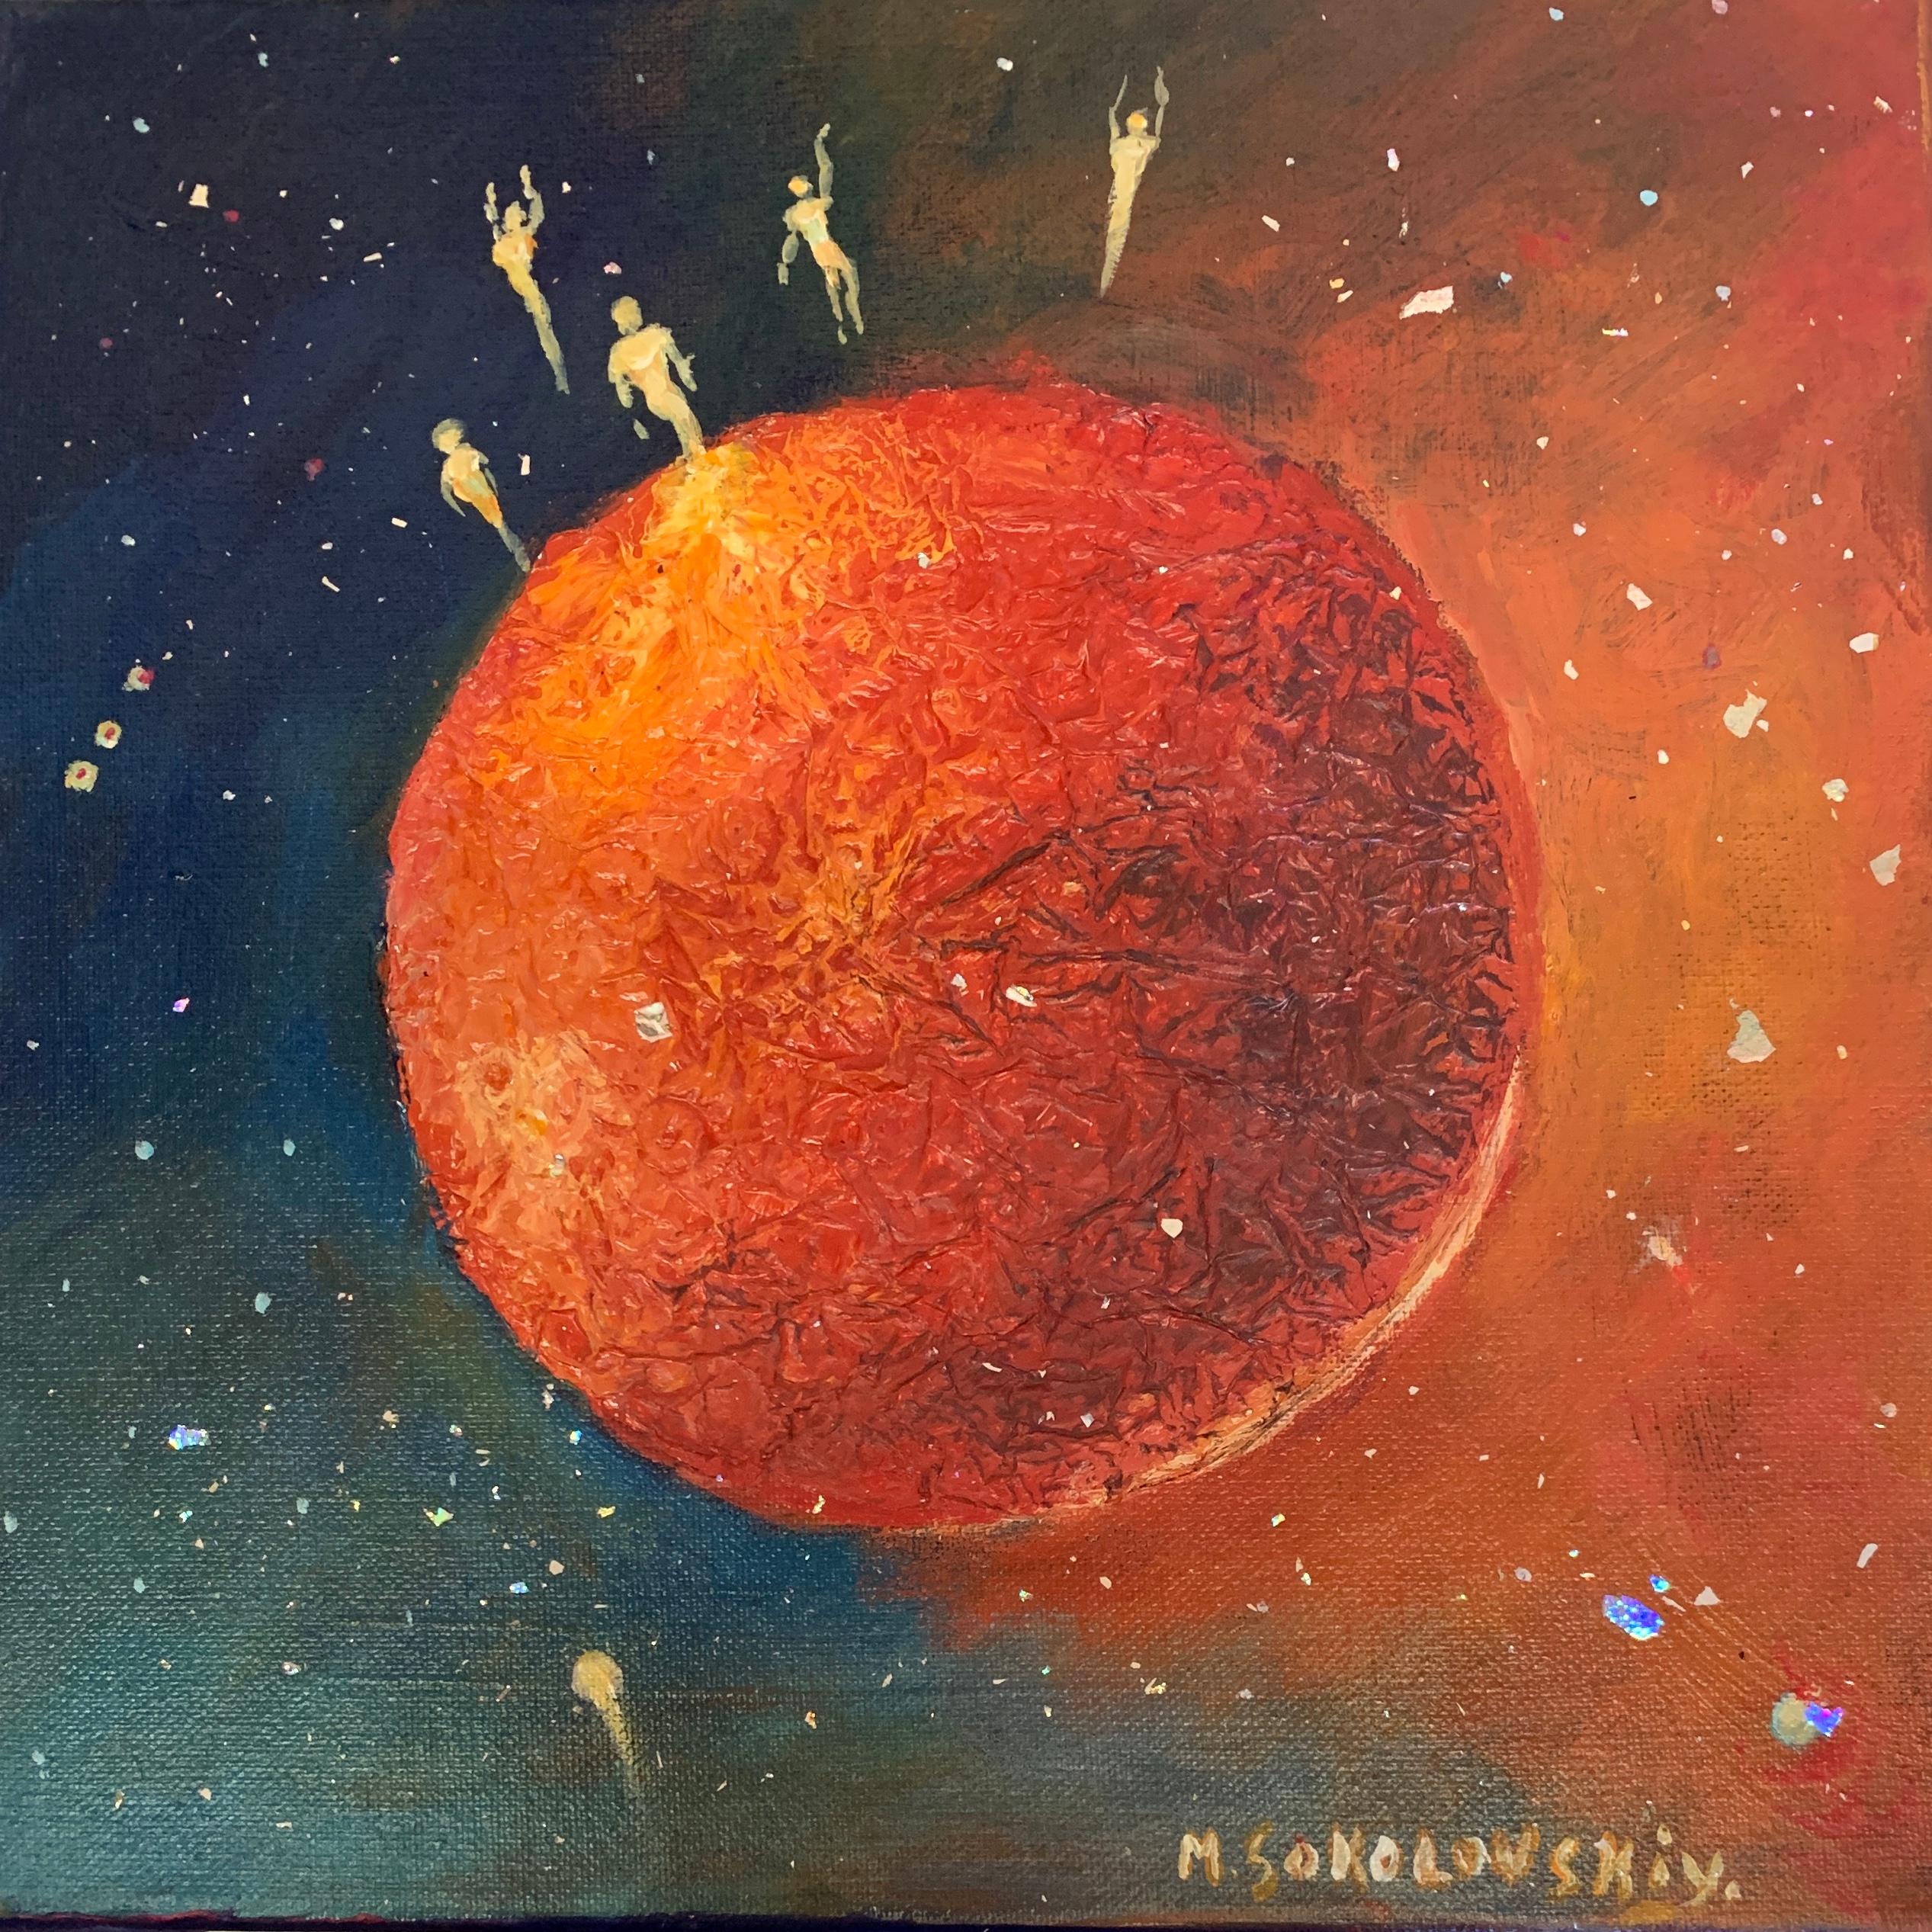 The Red Planet - Painting by Mikhail Sokolovskiy